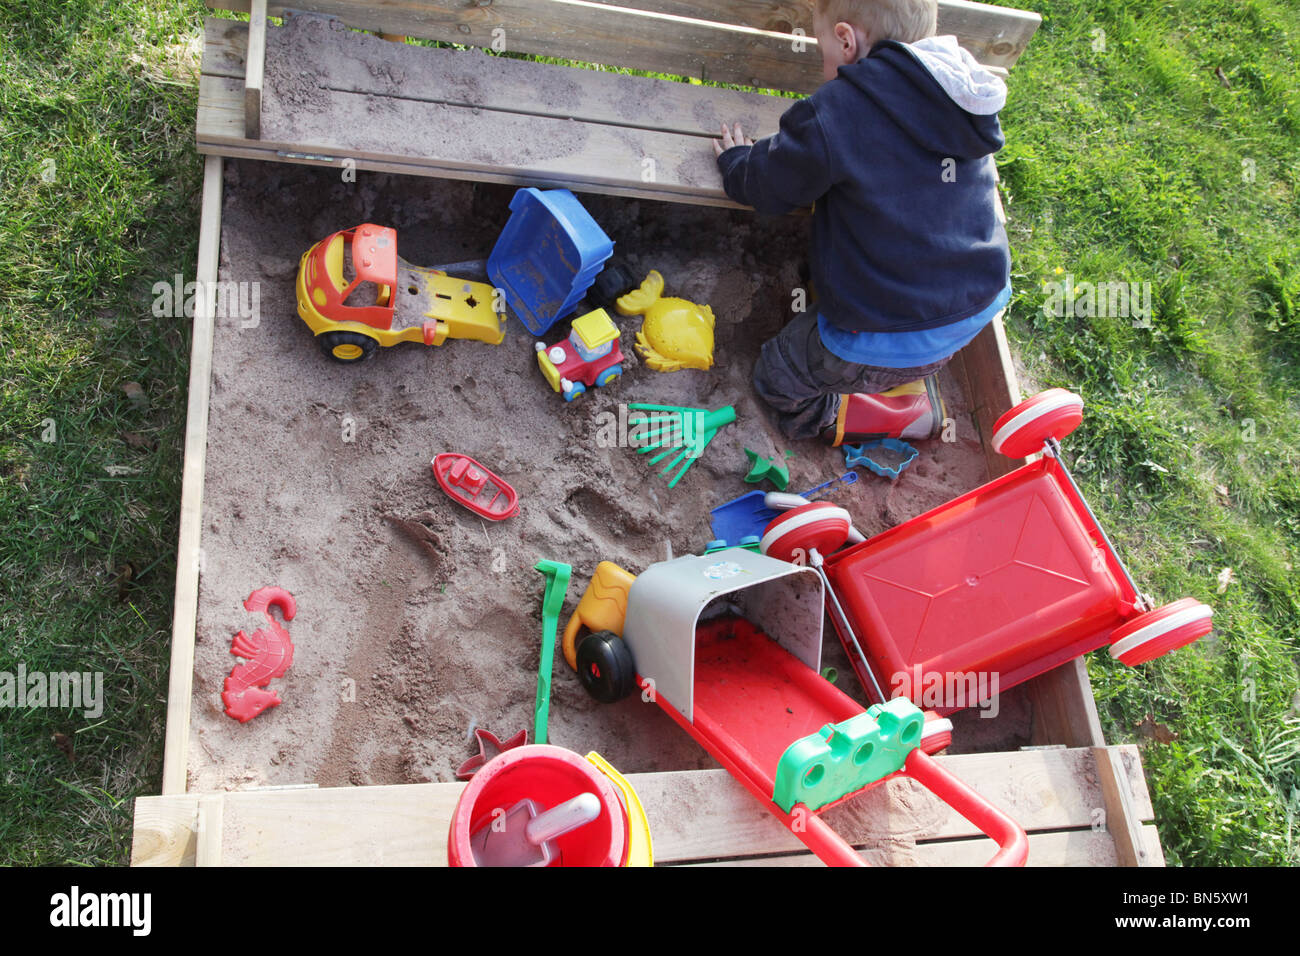 Toddler boy in the garden playing in a sandpit with plastic toys MODEL RELEASED Stock Photo